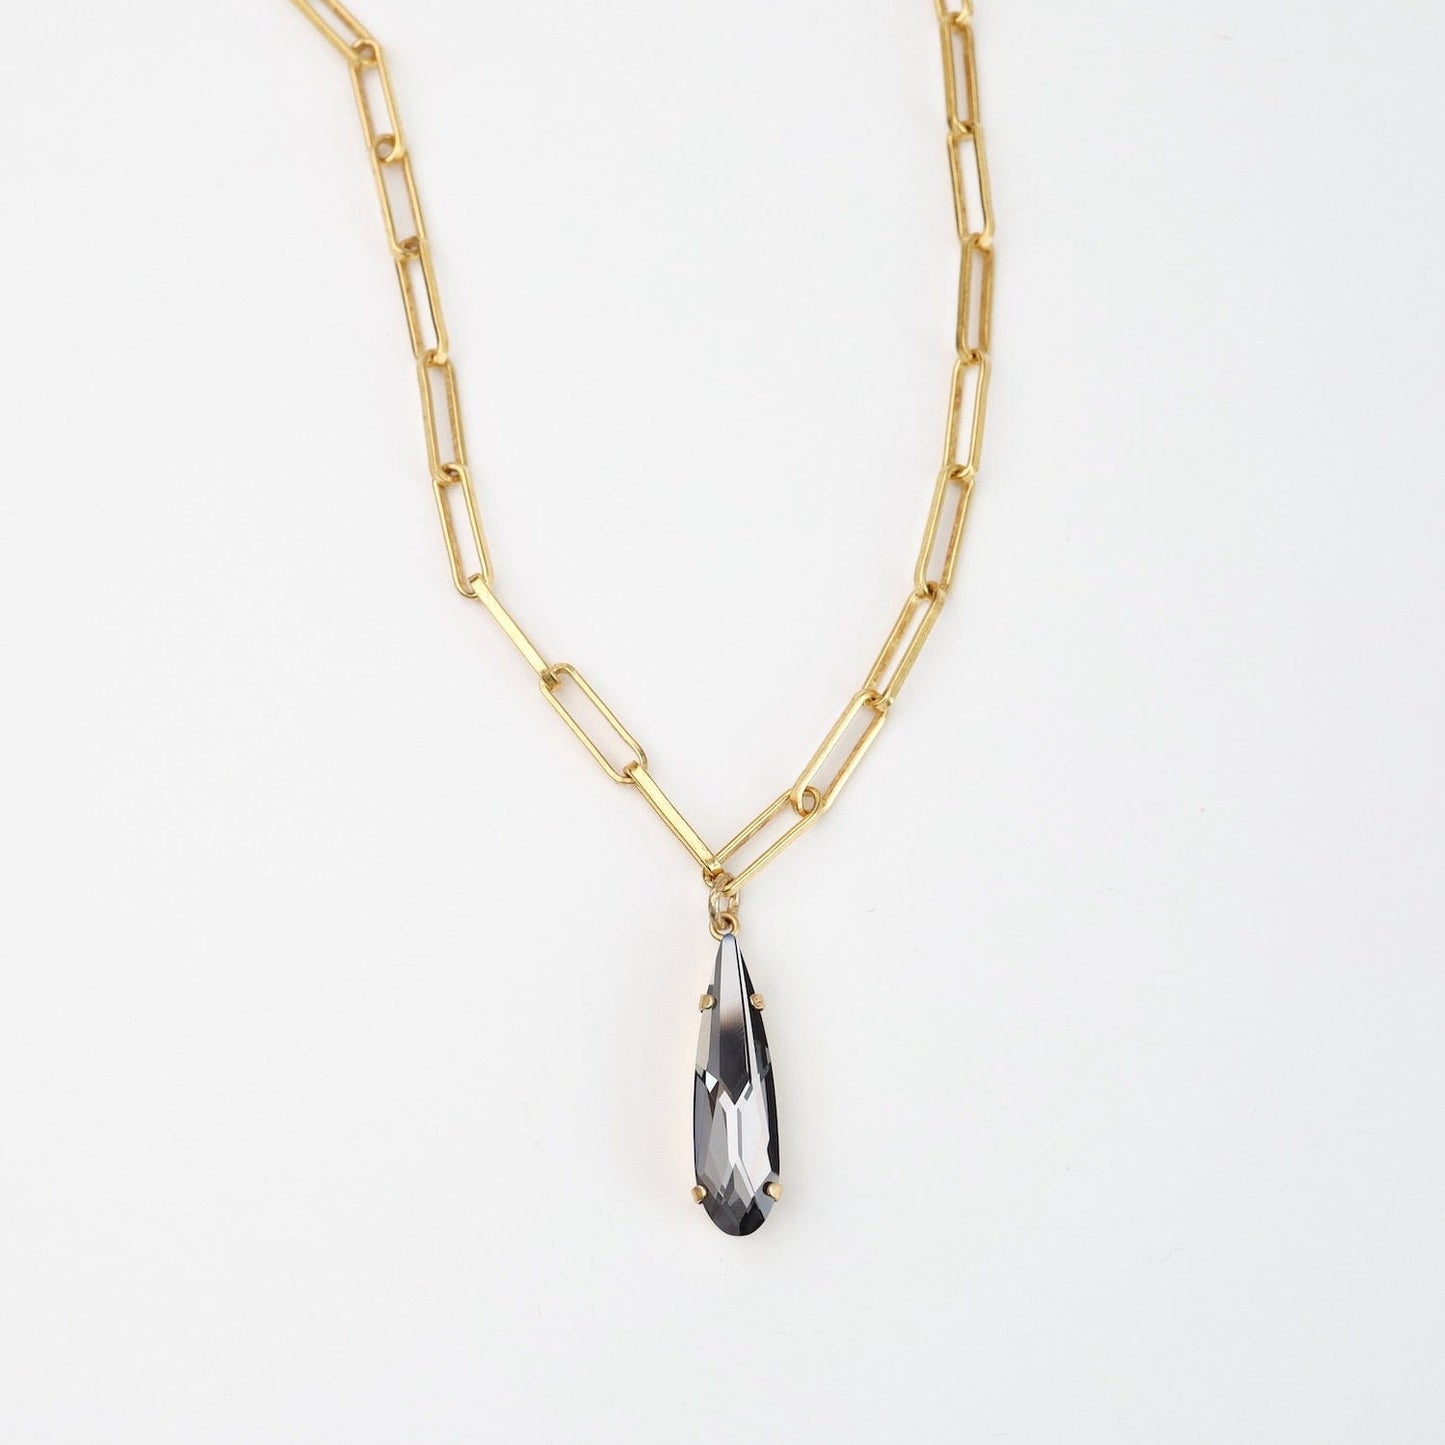 NKL-JM Gold Plate Oval Link Chain with Single Crystal Teardrop